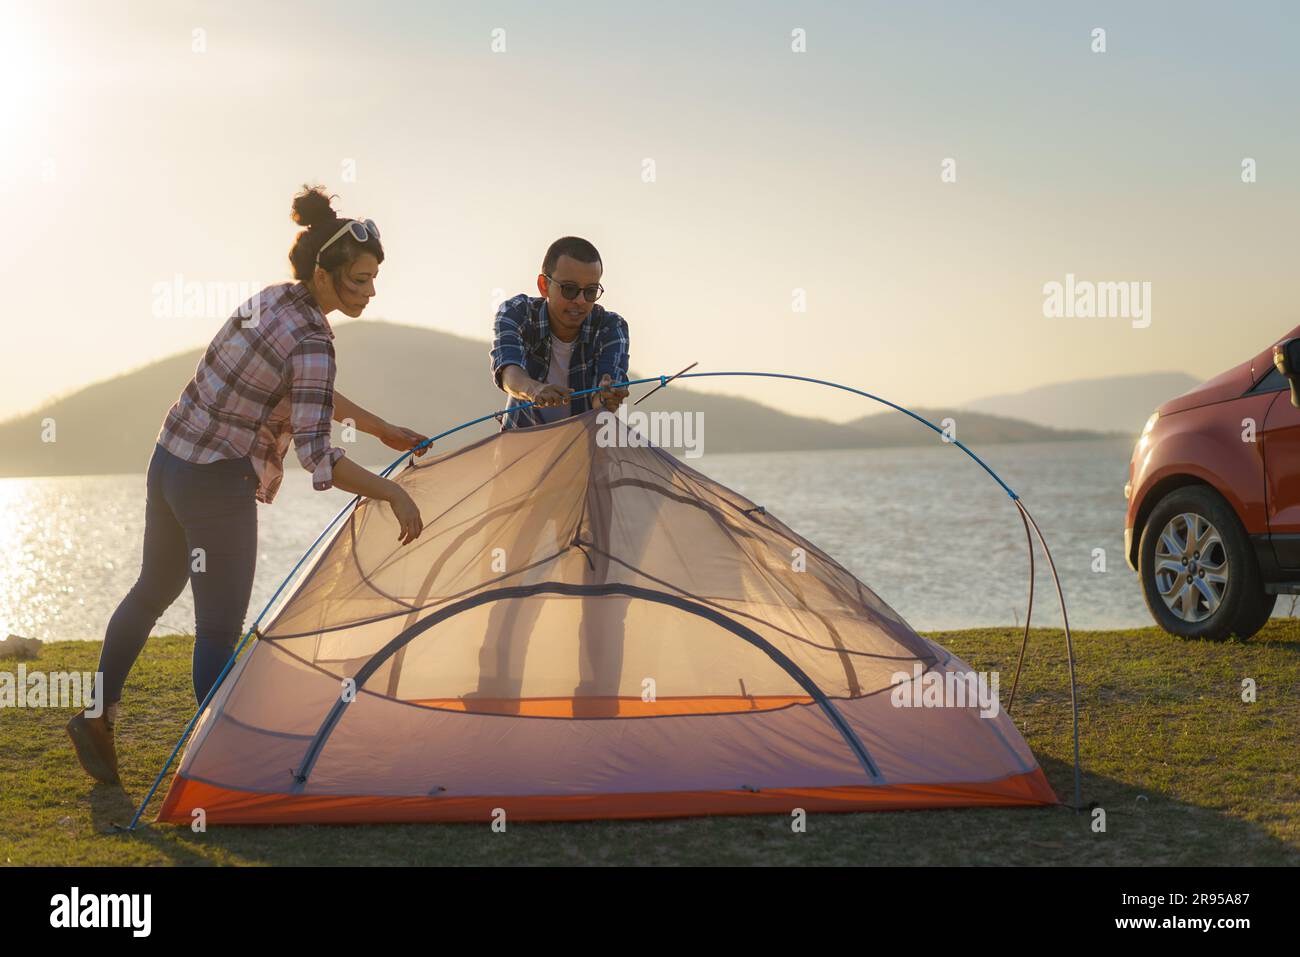 Asian couple preparing a tent to camping in the lawn with the lake in the background during sunset Stock Photo